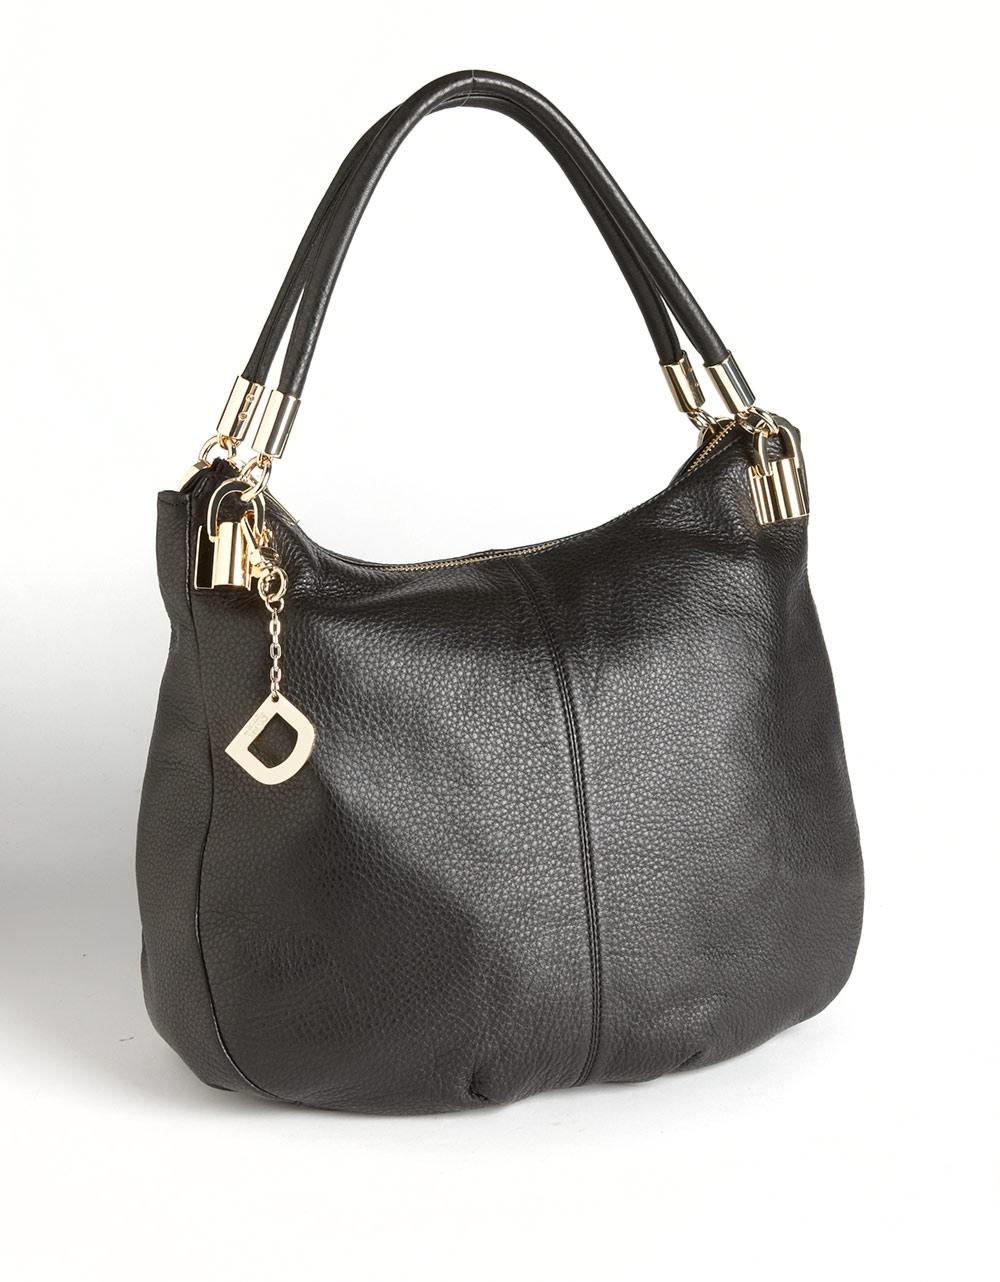 Dkny Large Leather Hobo Bag in Black | Lyst